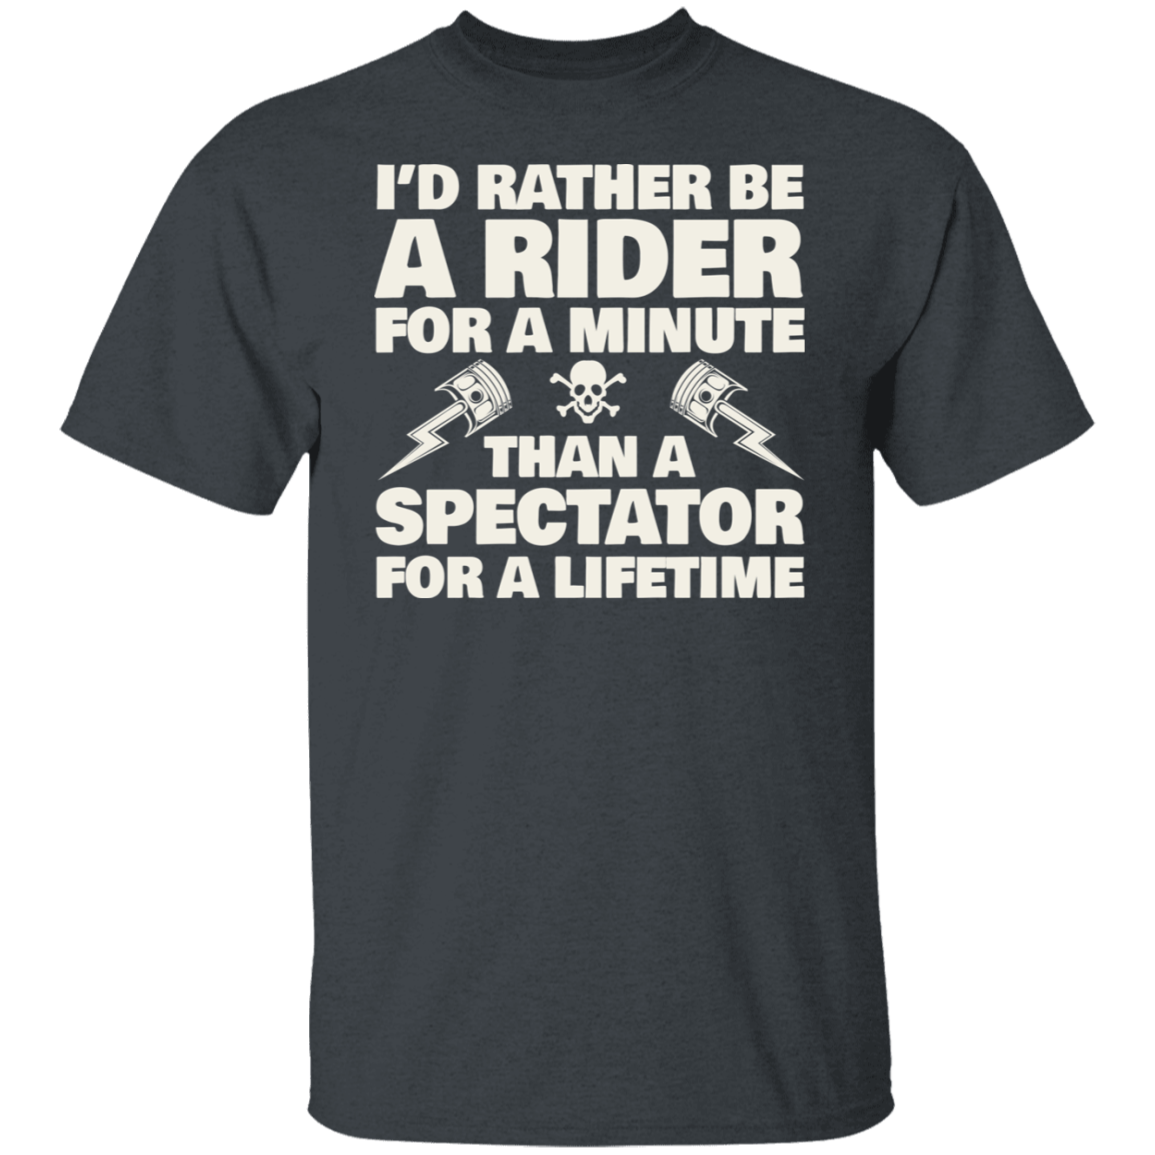 I’d rather be a rider for a minute, than a spectator for a lifetime Biker Shirt